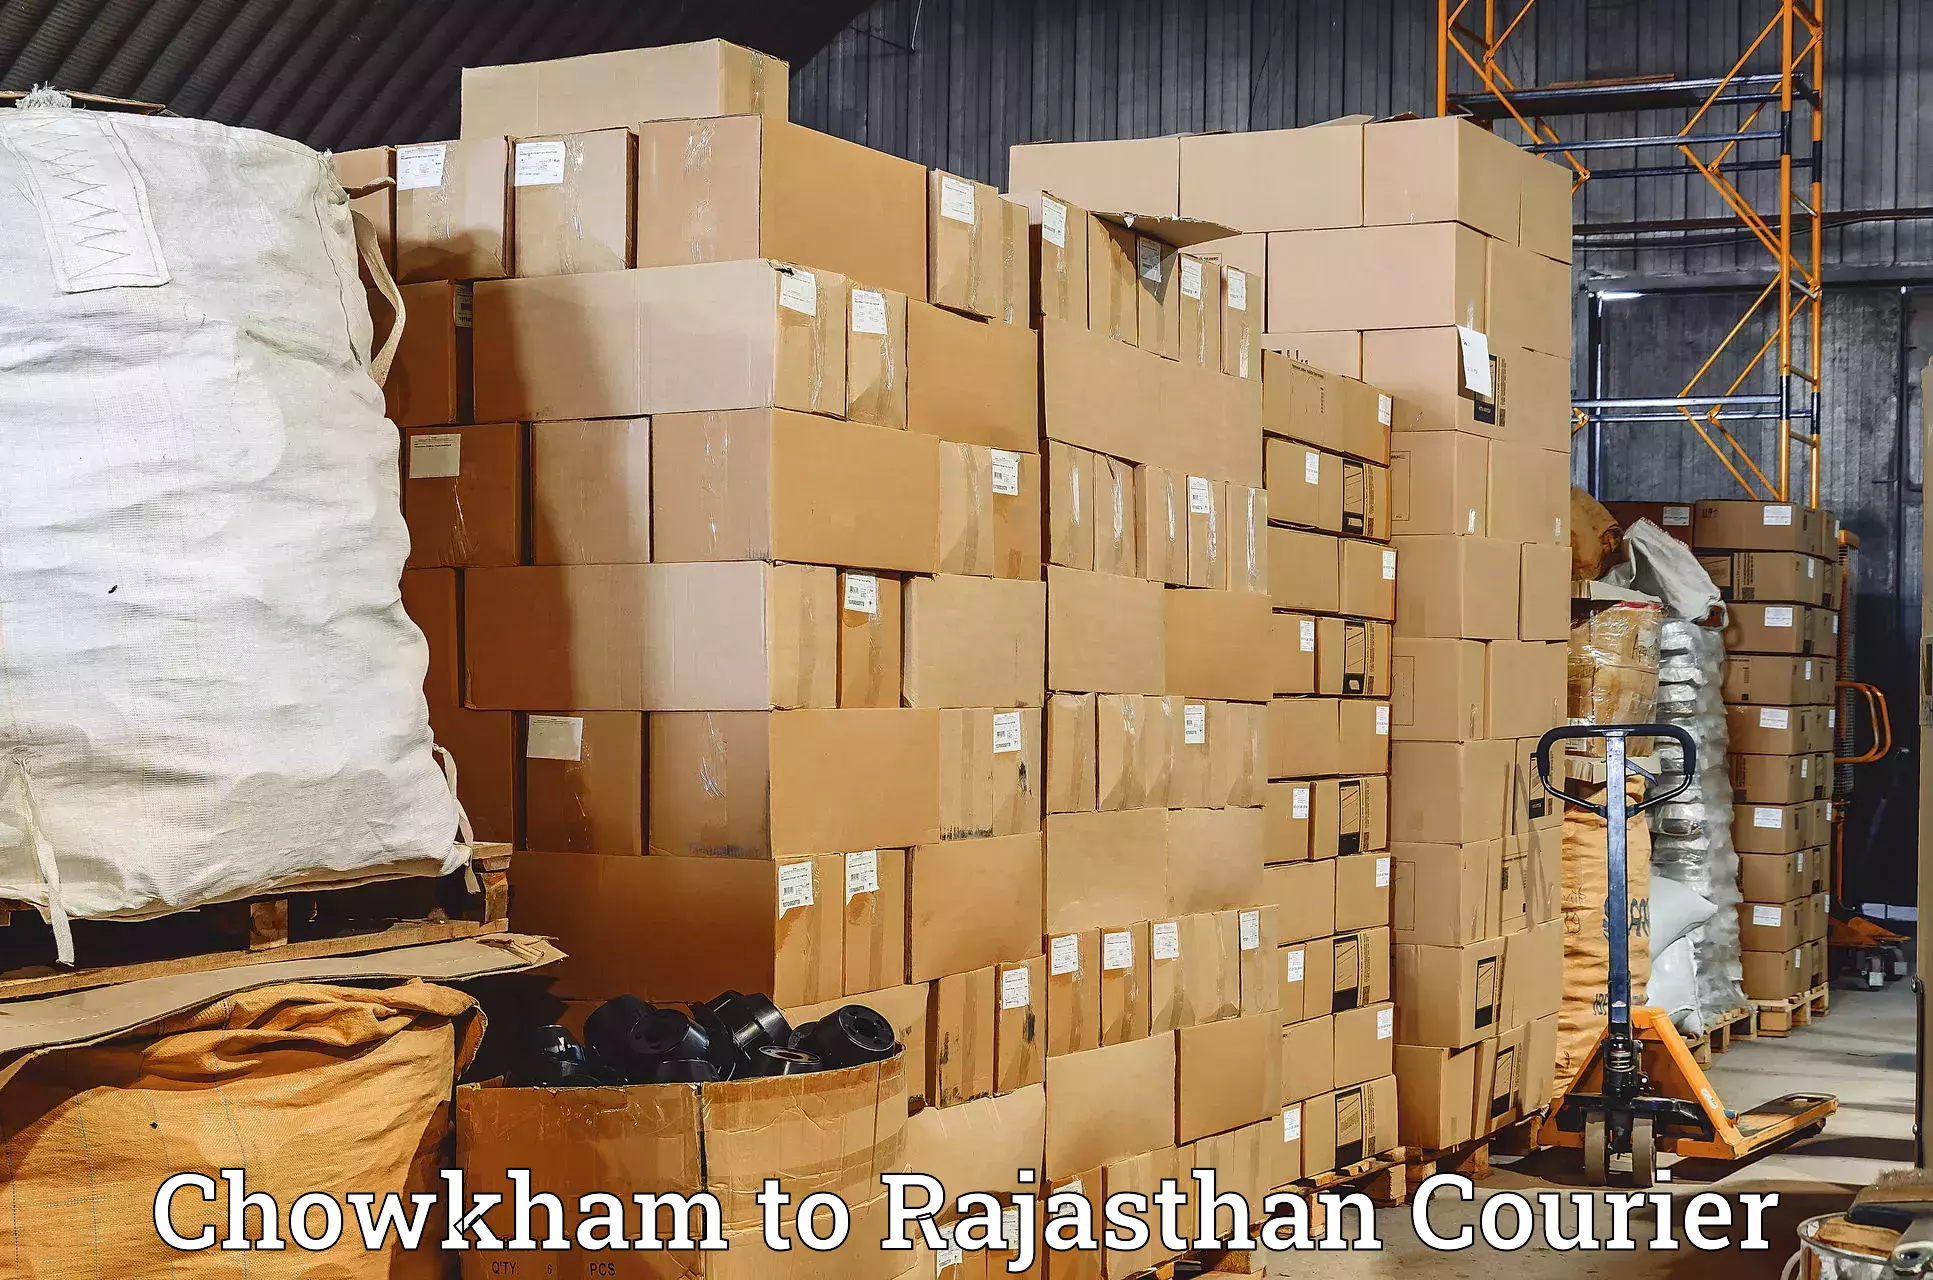 Express mail service Chowkham to Rajasthan